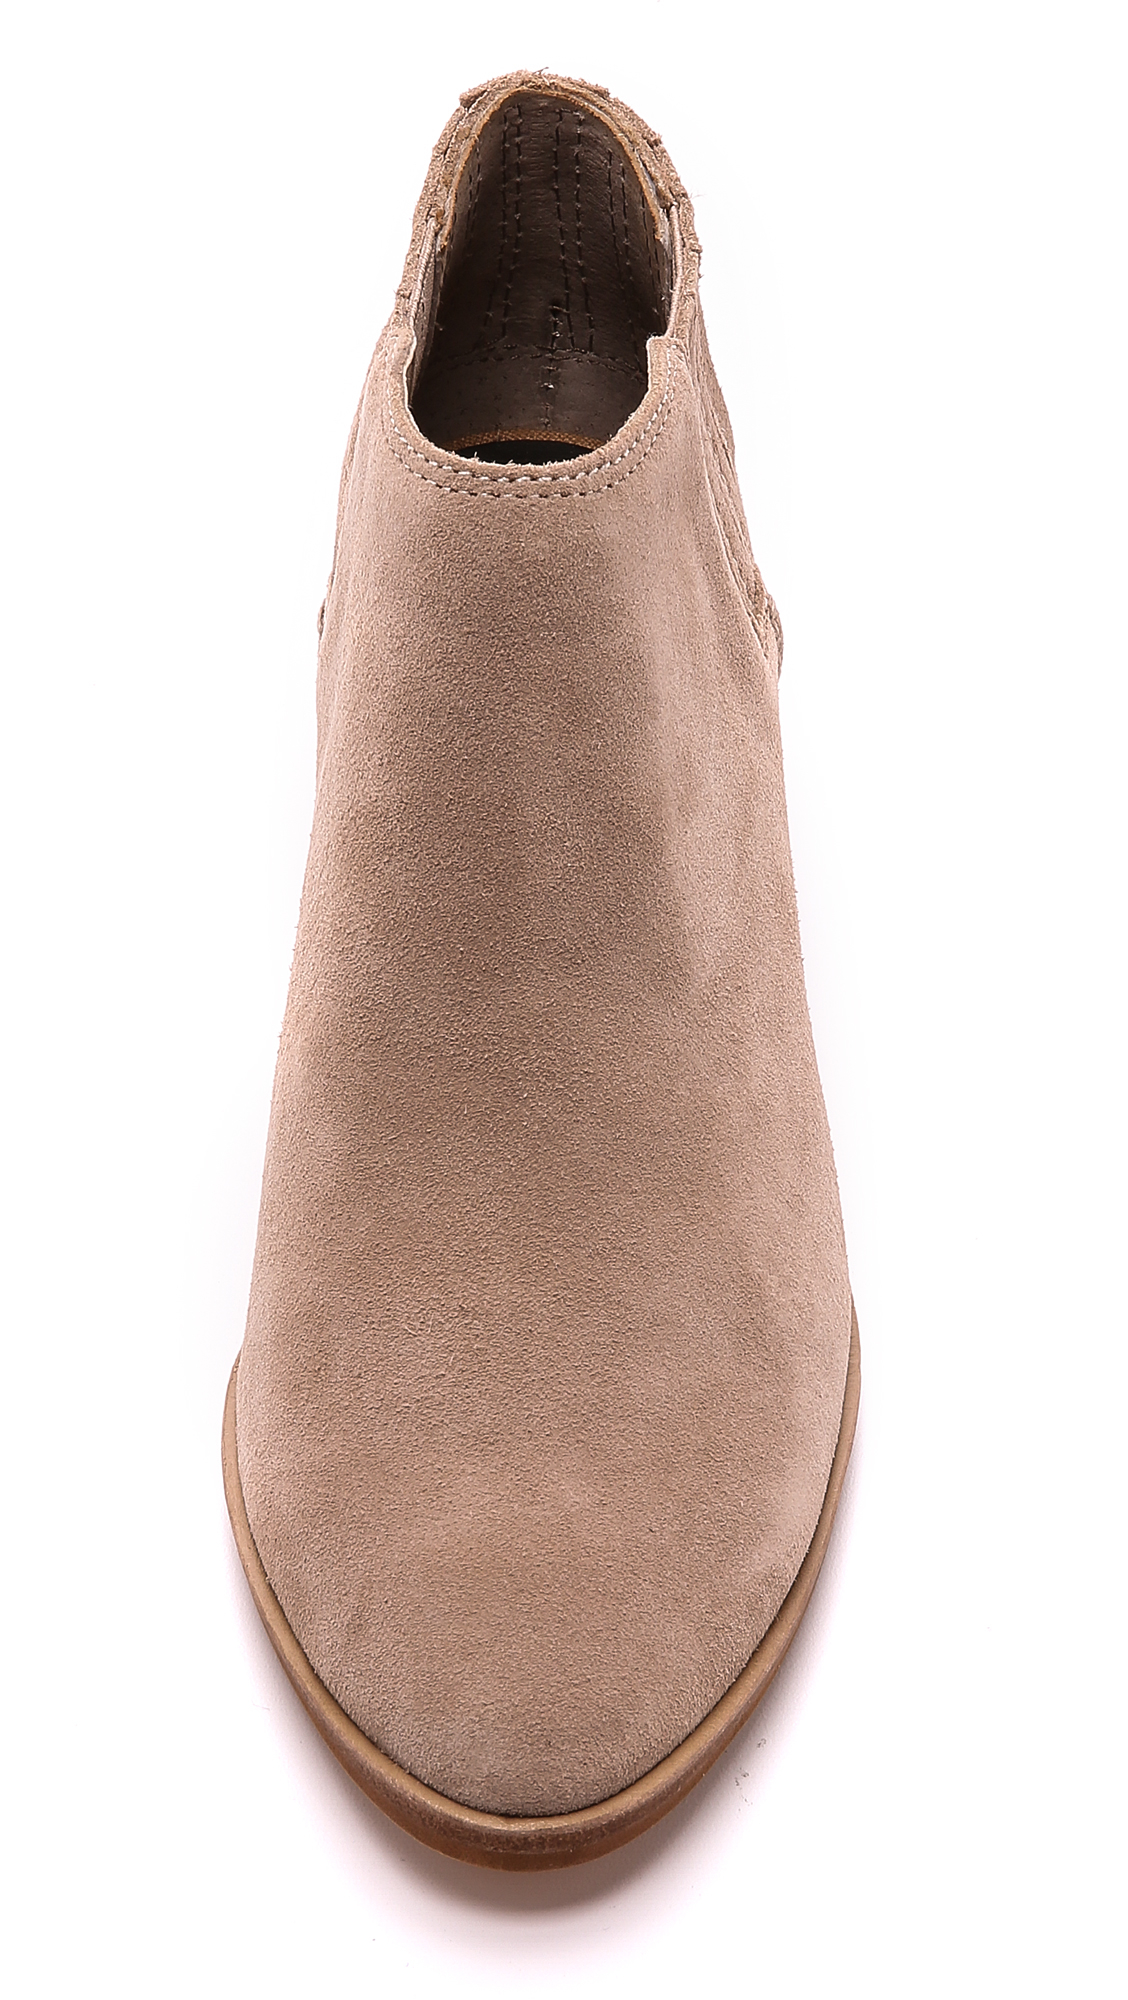 dolce vita taupe booties